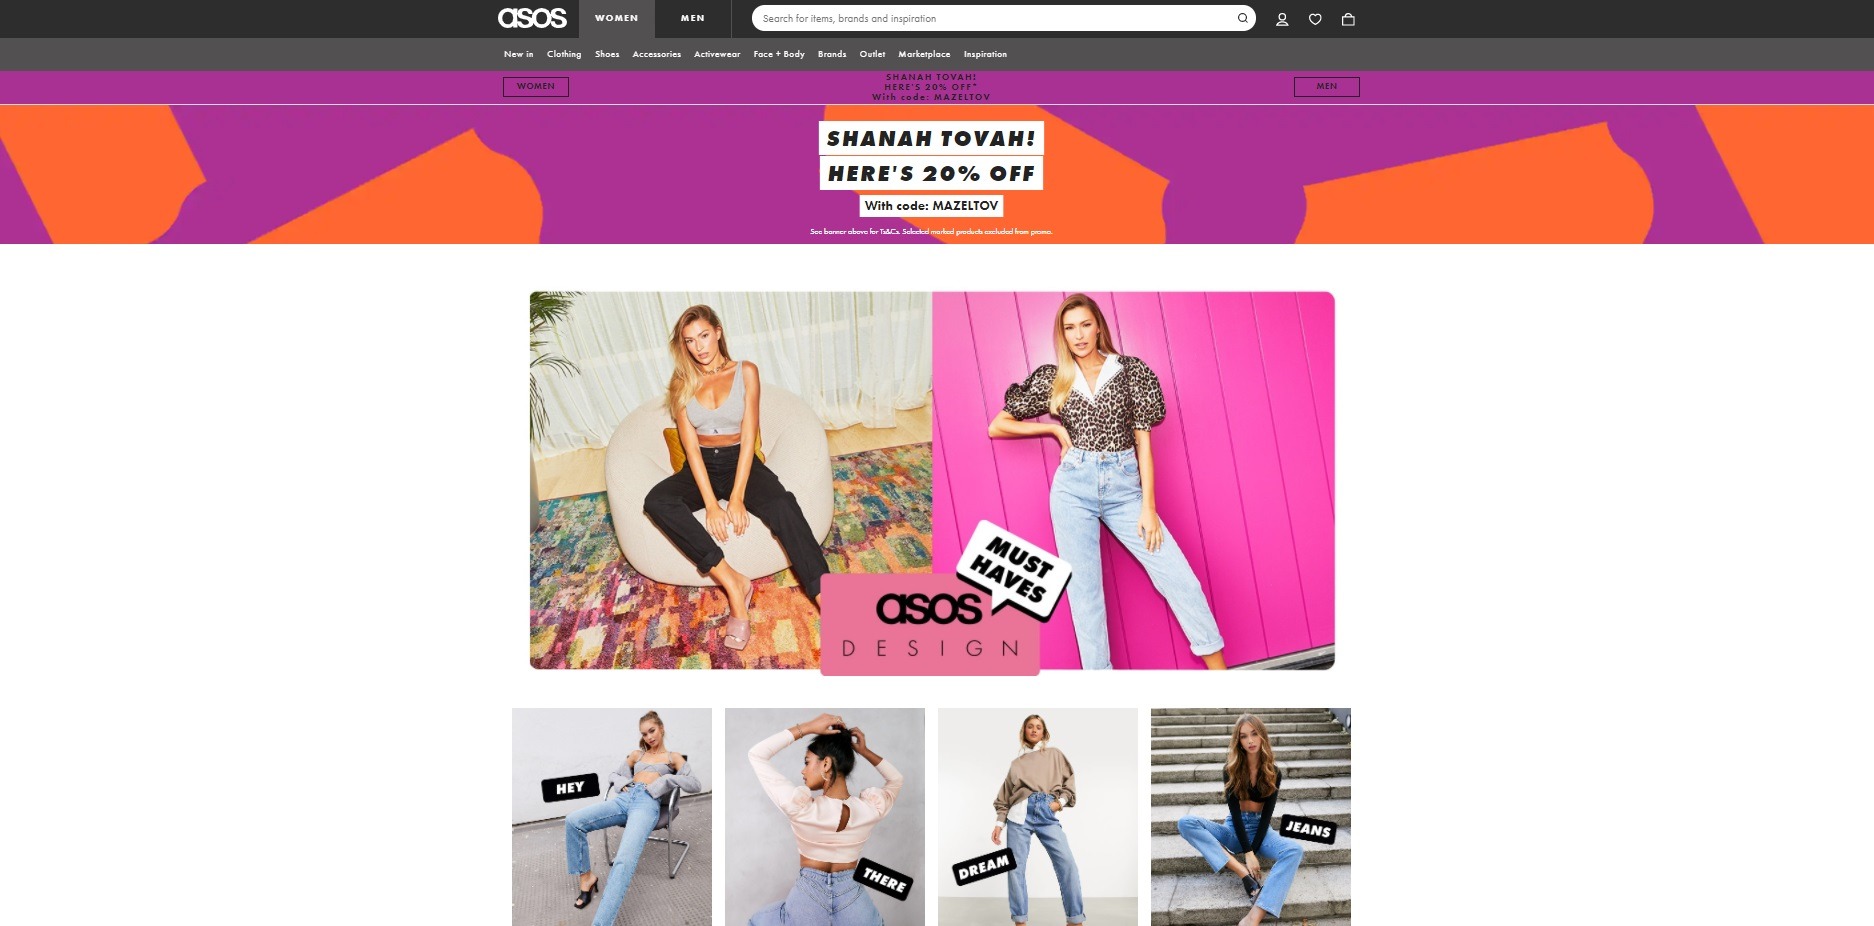 Asos personalized navigation example